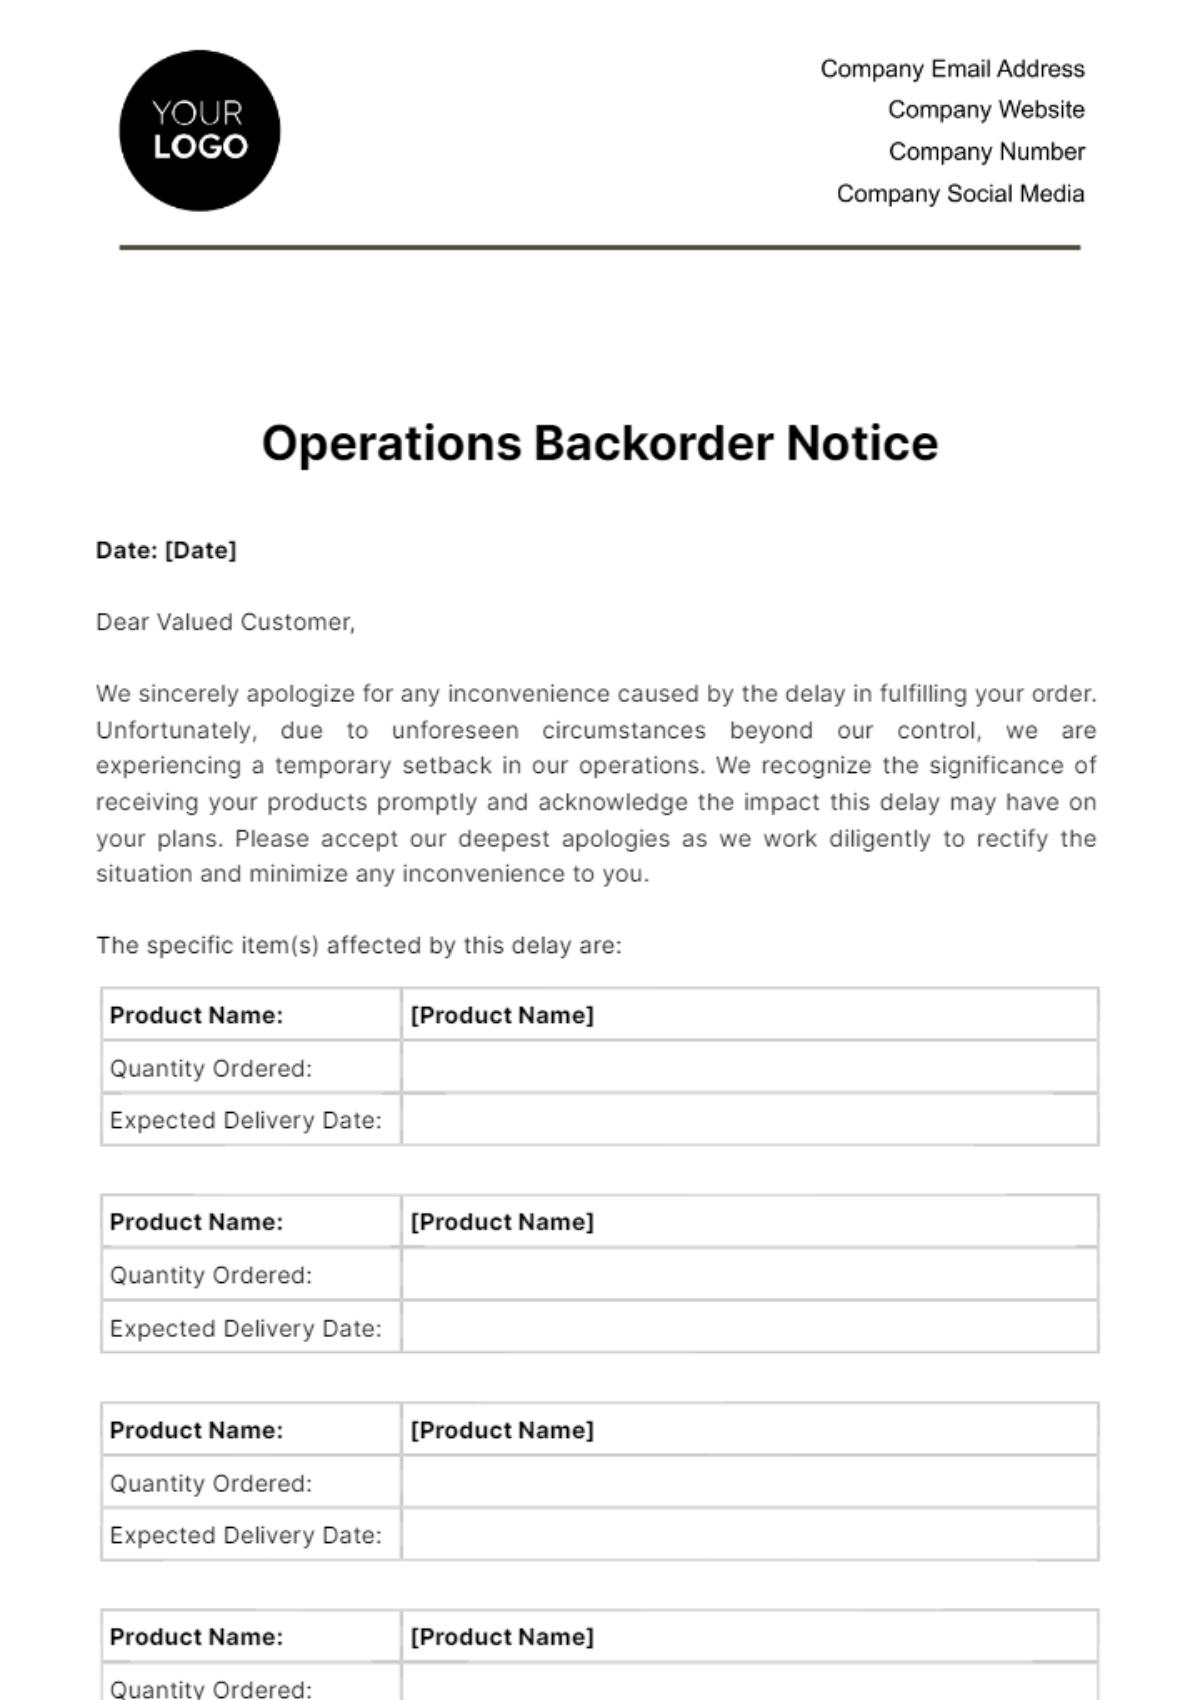 Free Operations Backorder Notice Template